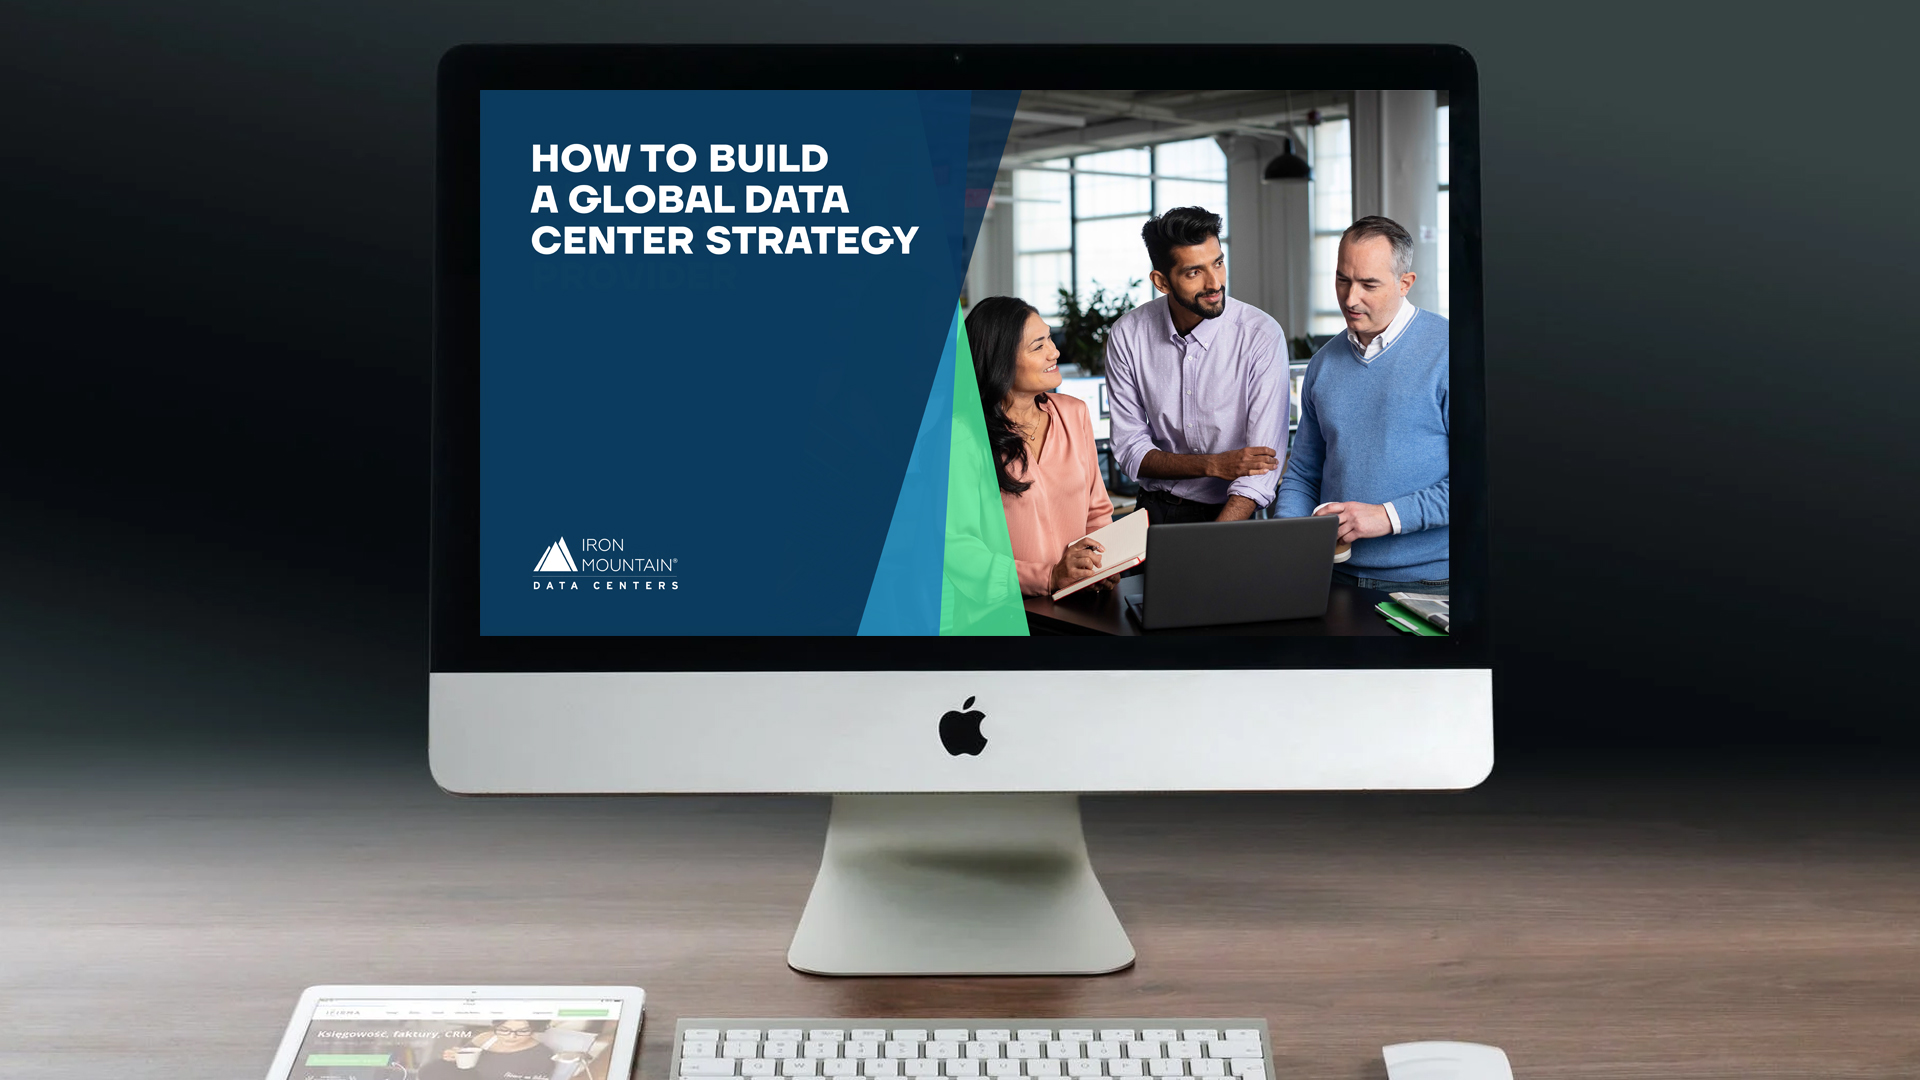 What to consider when building a global data center strategy